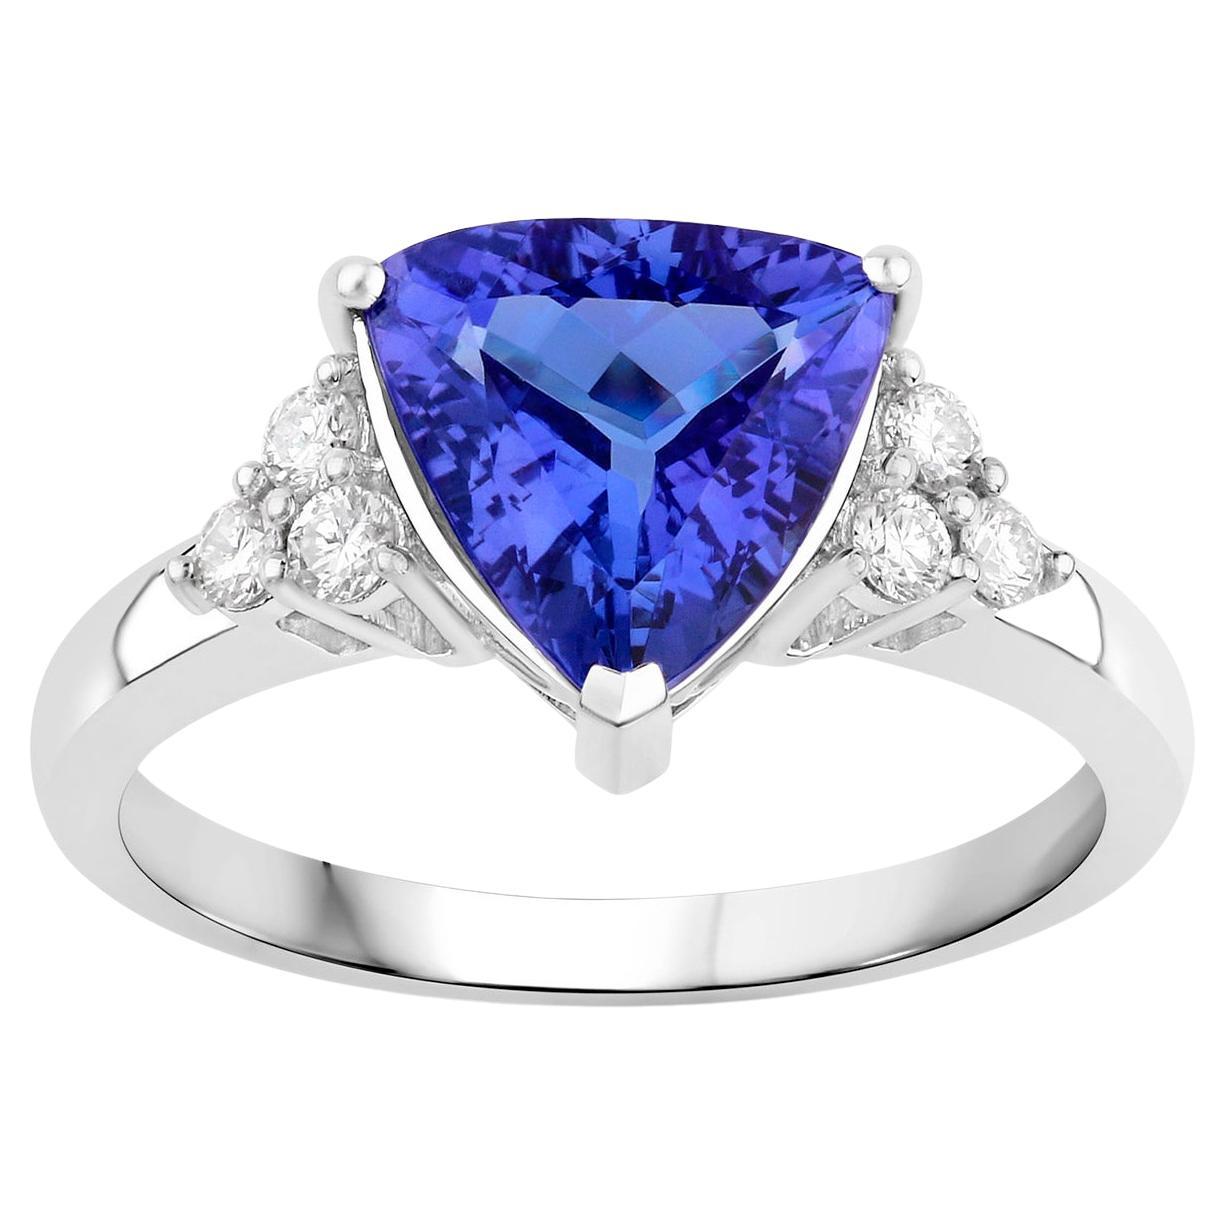 Tanzanite Ring With Diamonds 2.48 Carats 14K White Gold For Sale